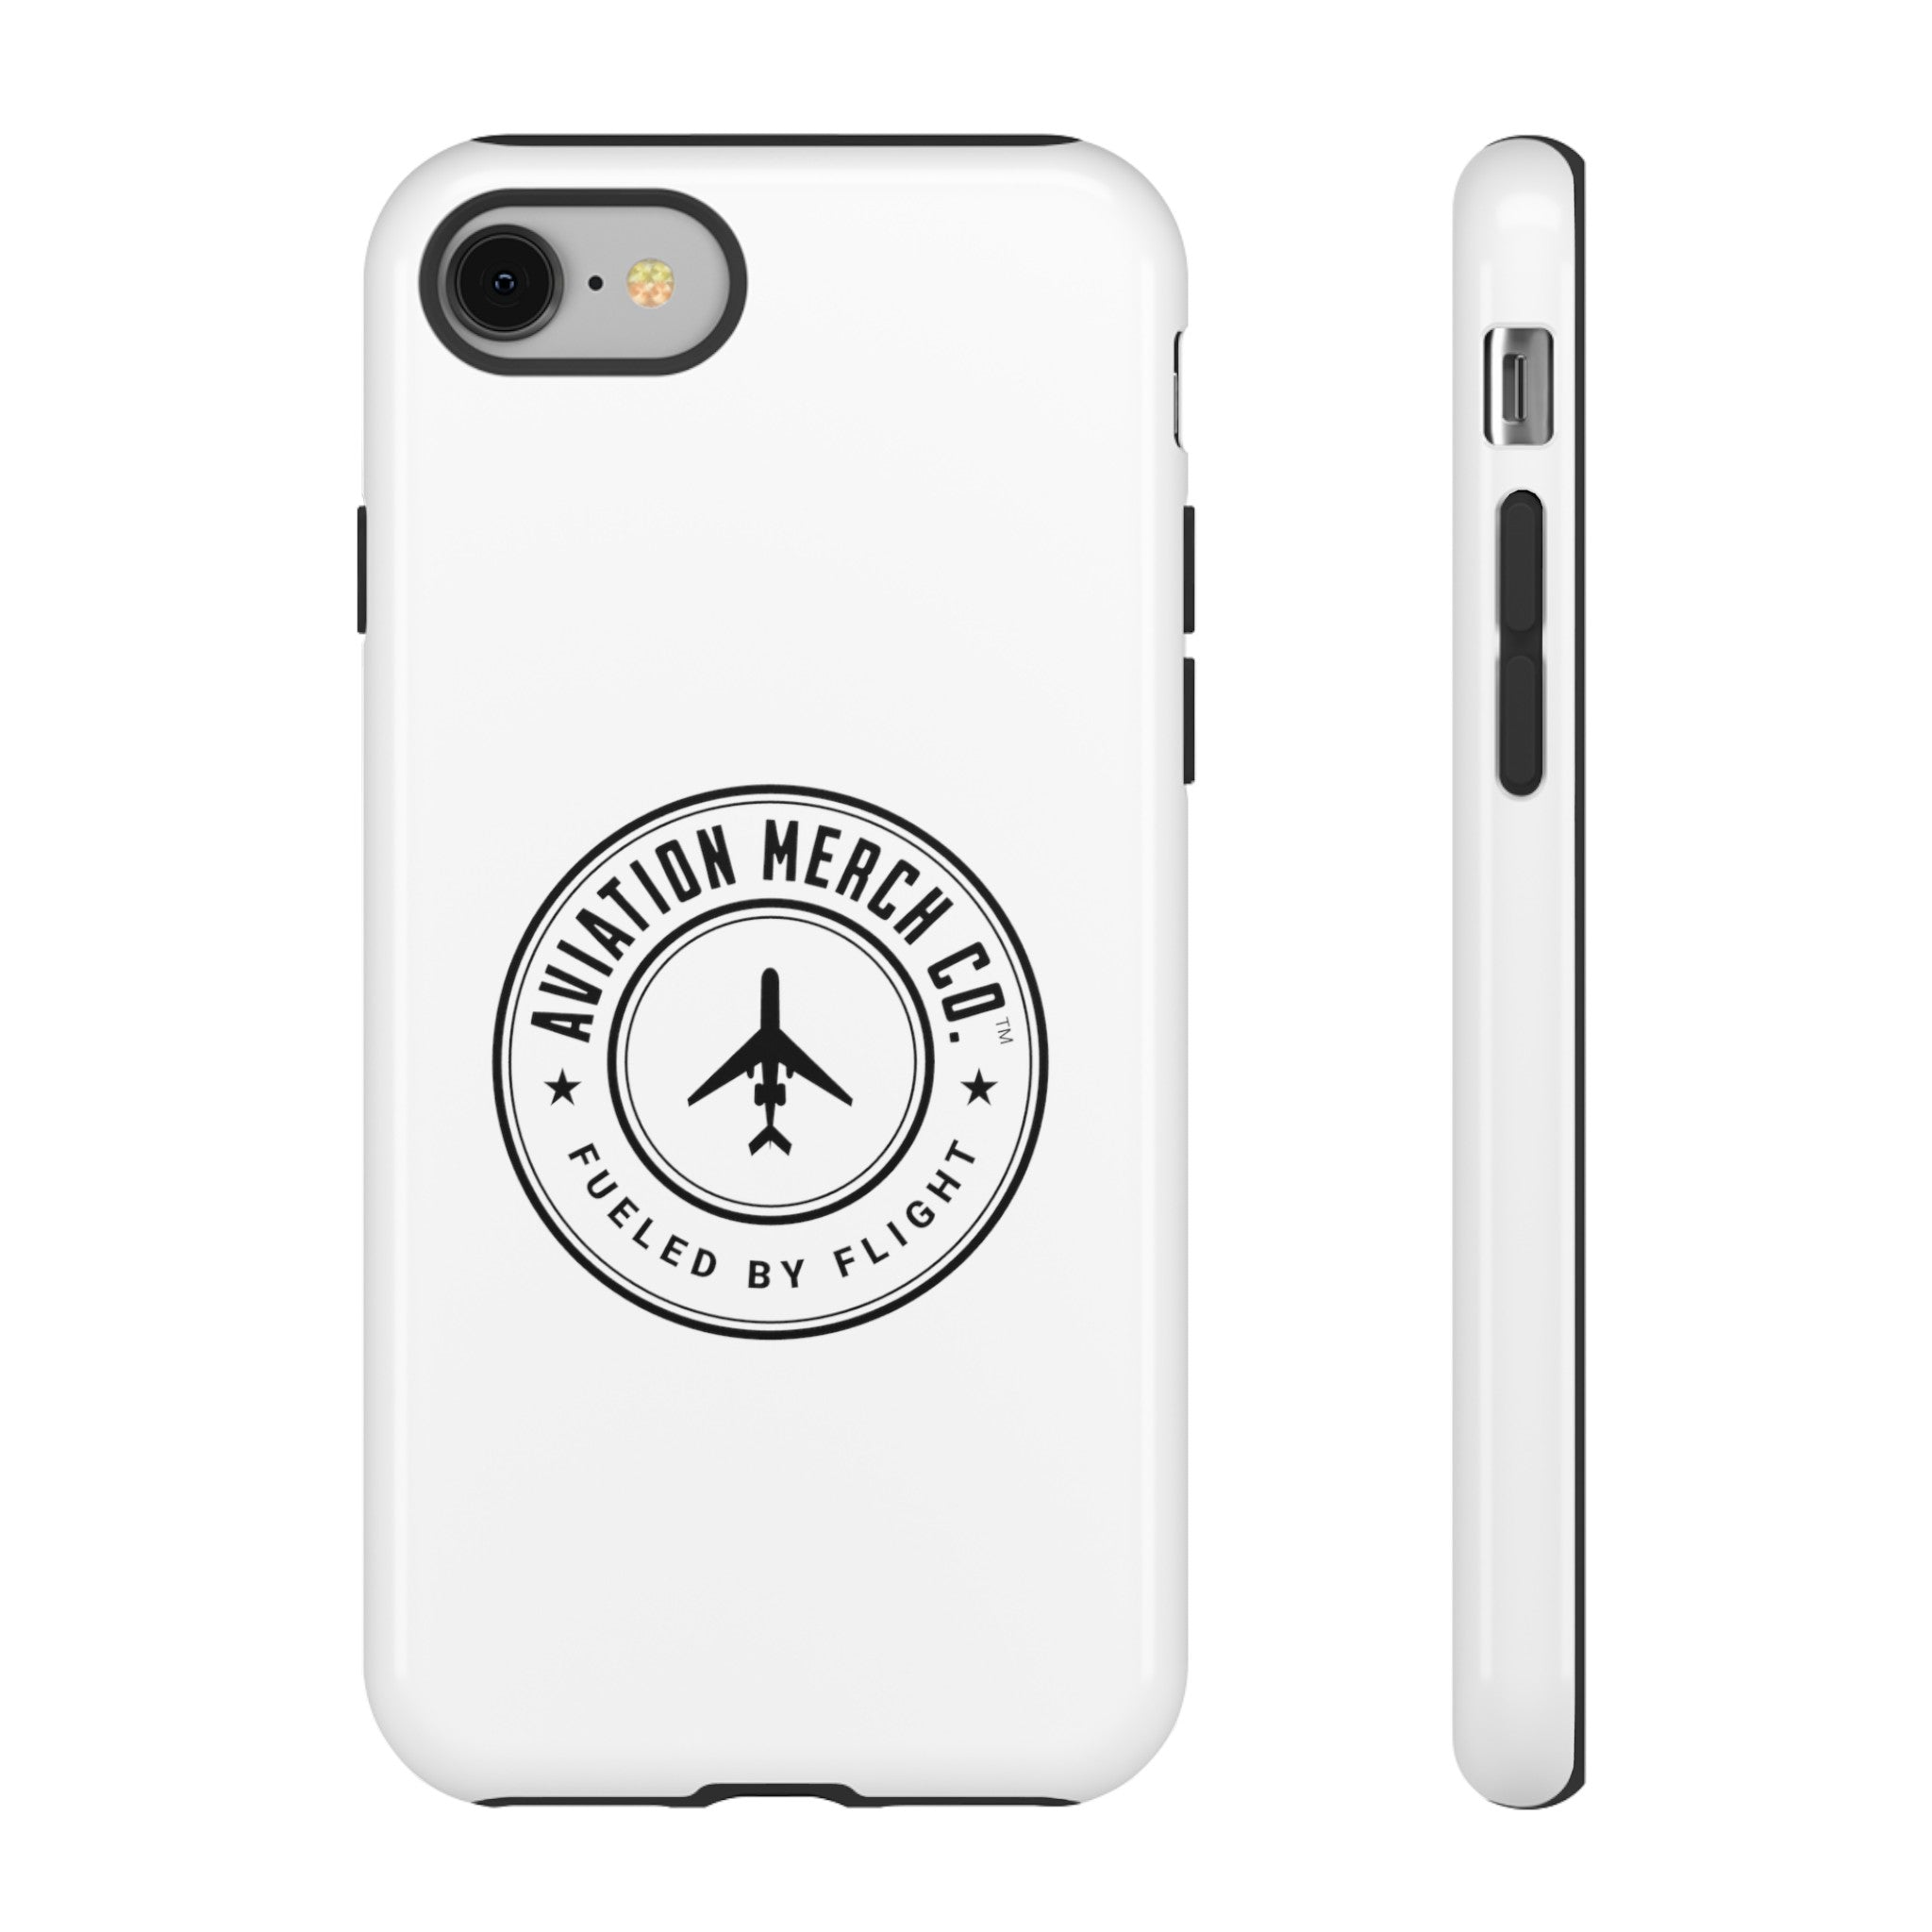 Aviation Merch Co. Logo Tough Cases for iPhone, Samsung Galaxy, and Google Pixel